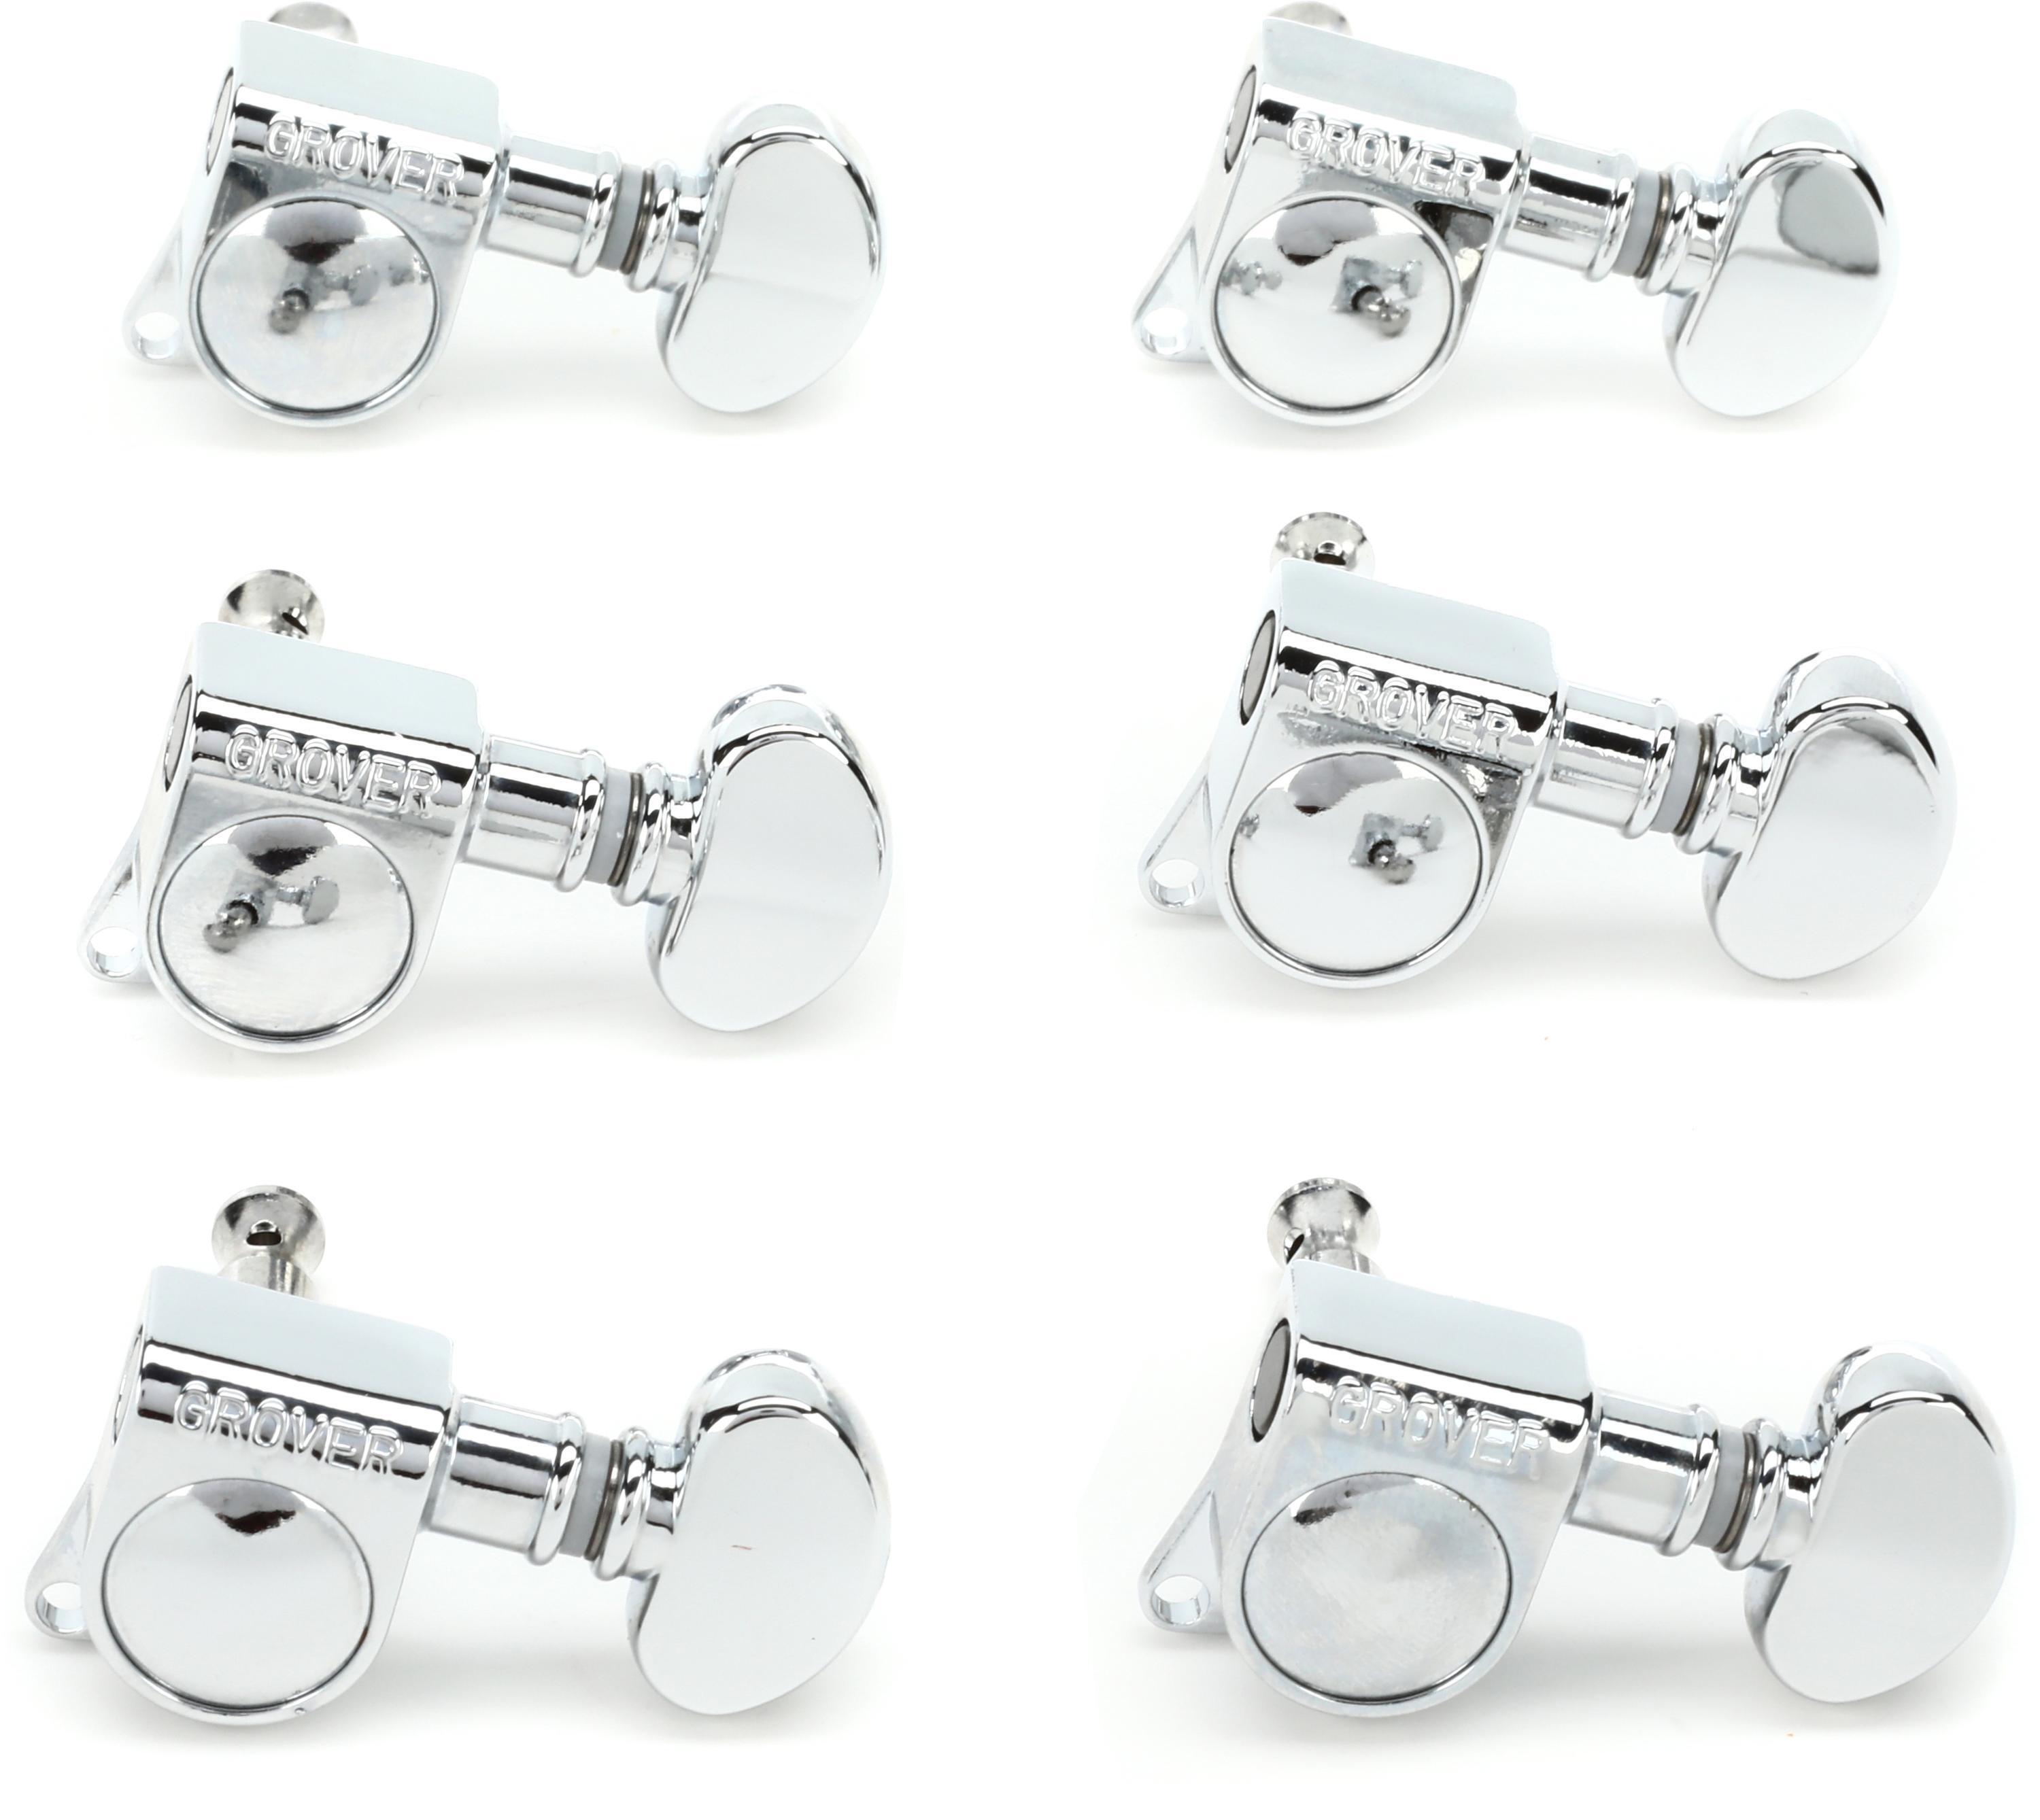 Grover 305C6 Mid-Size Rotomatic Tuners - 6-In-line - Chrome